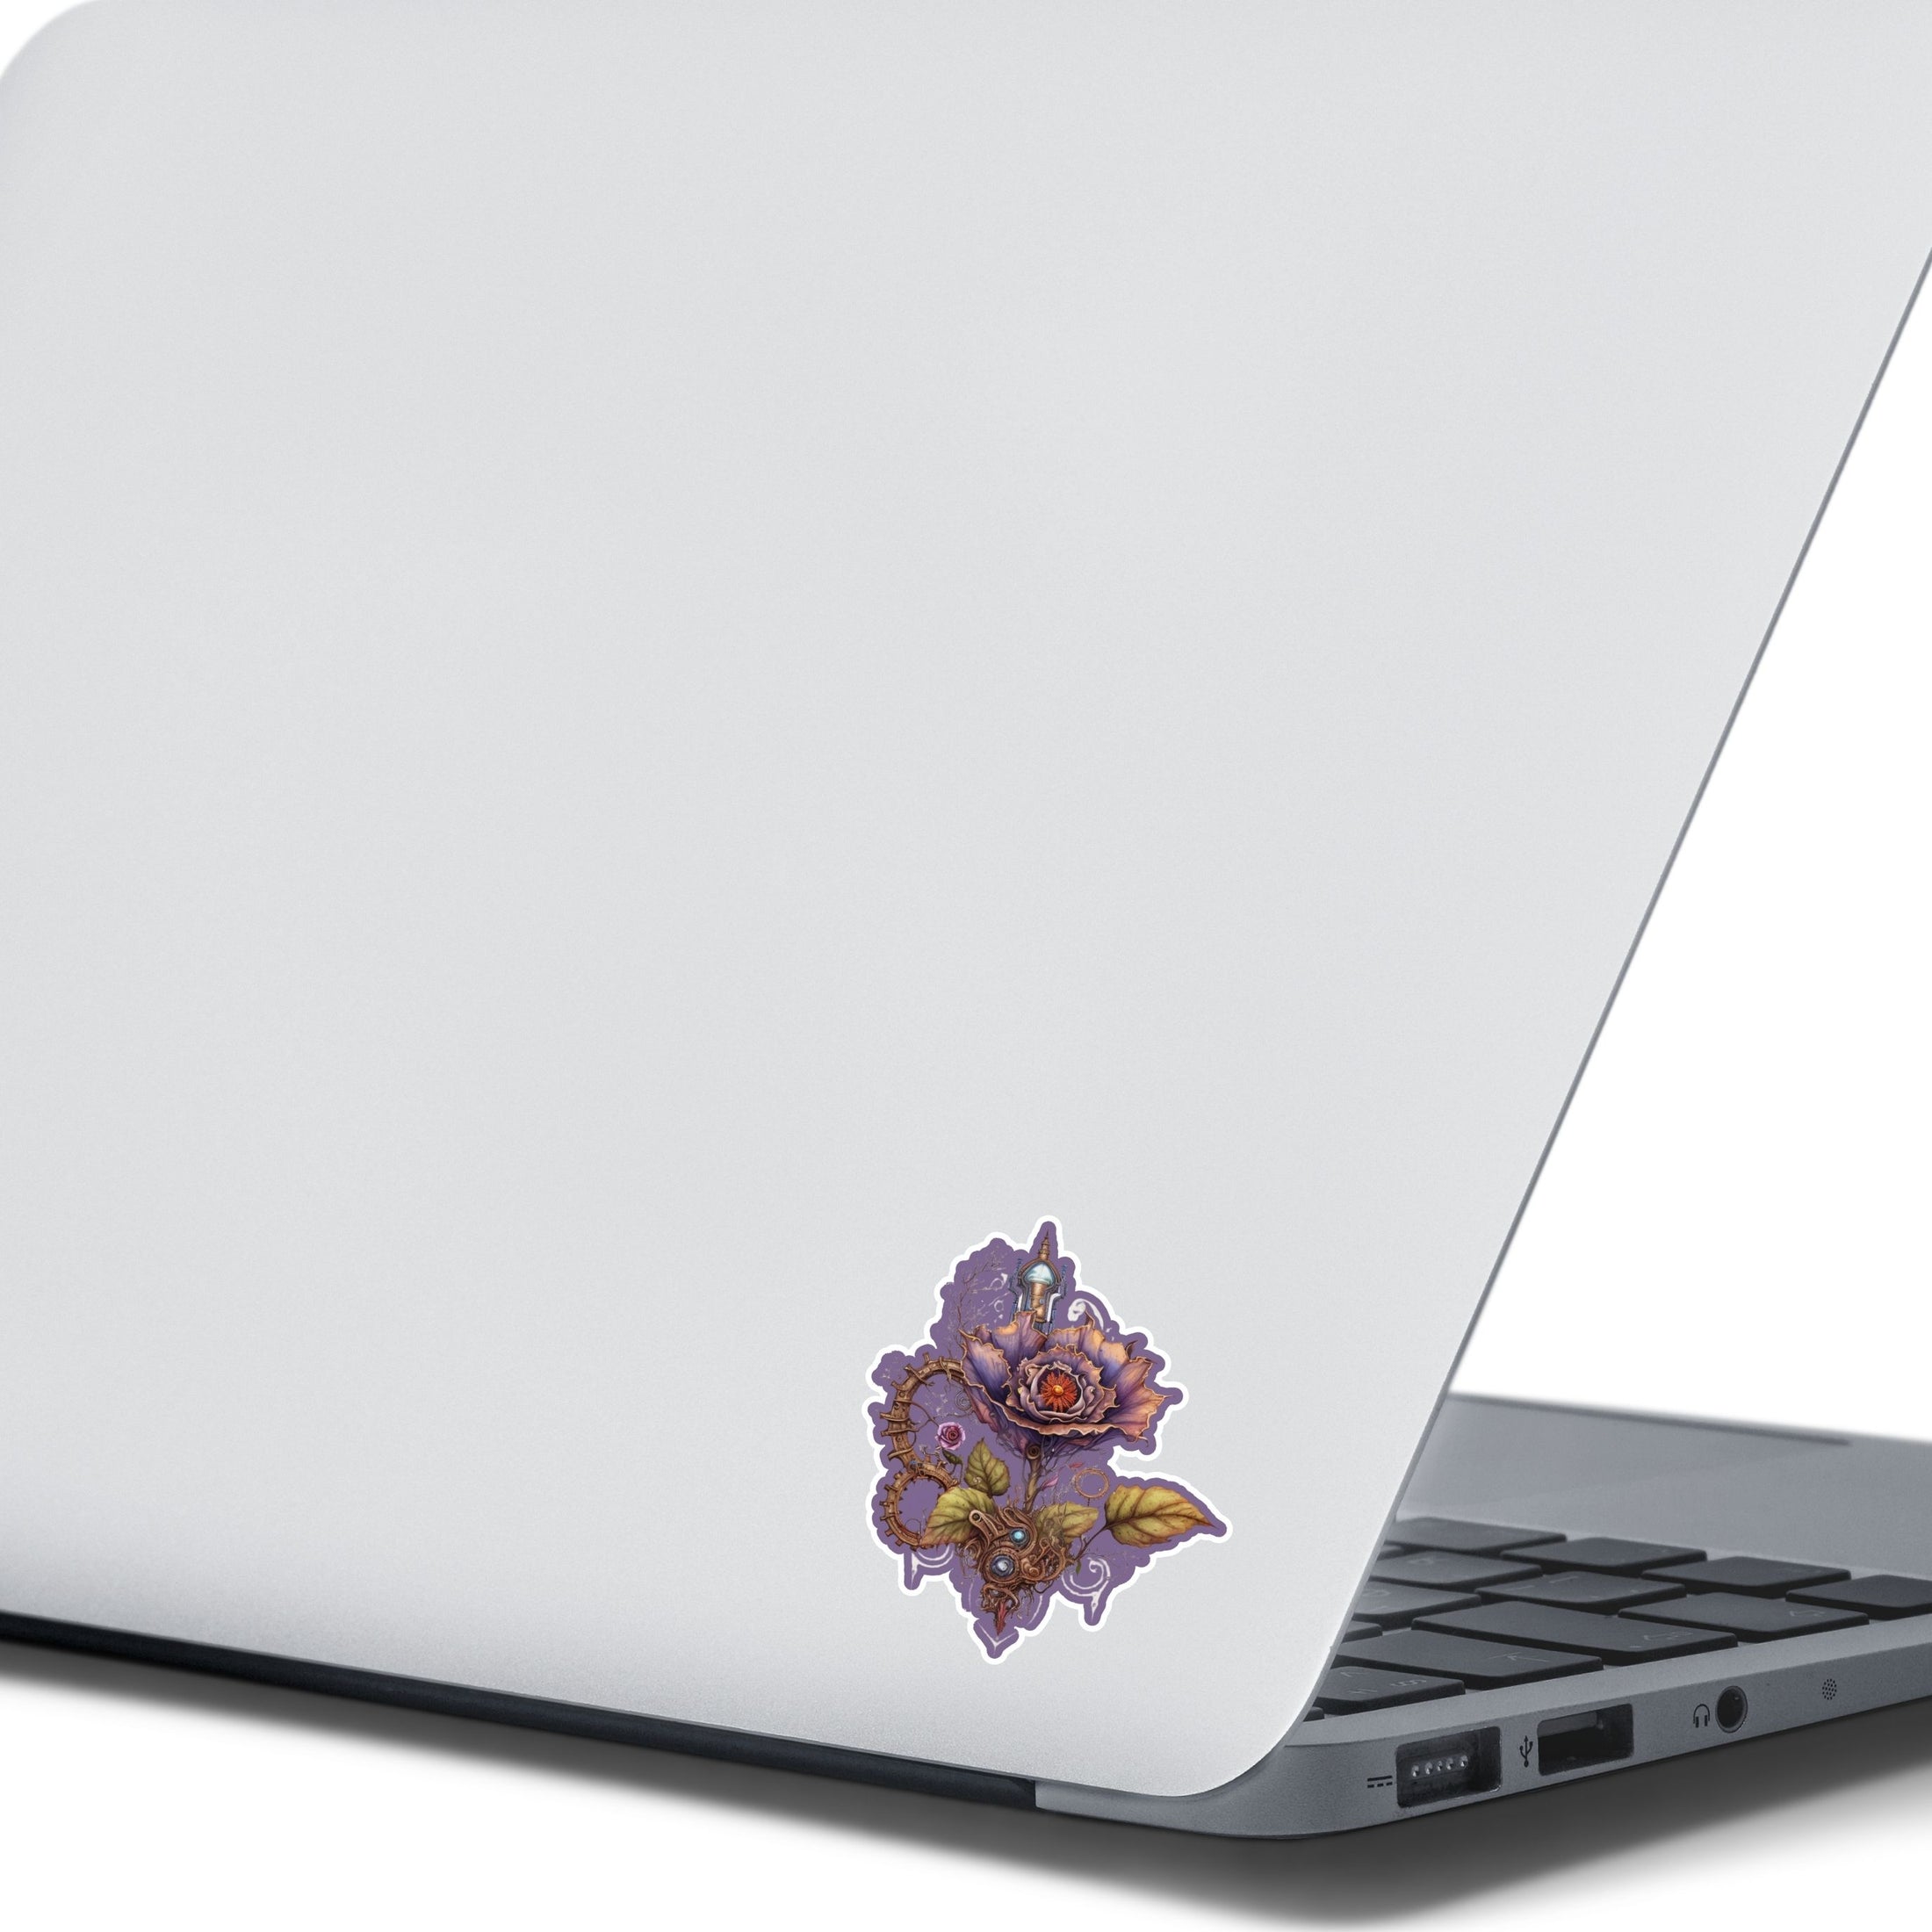 This image shows the steampunk rose sticker on the back of an open laptop.